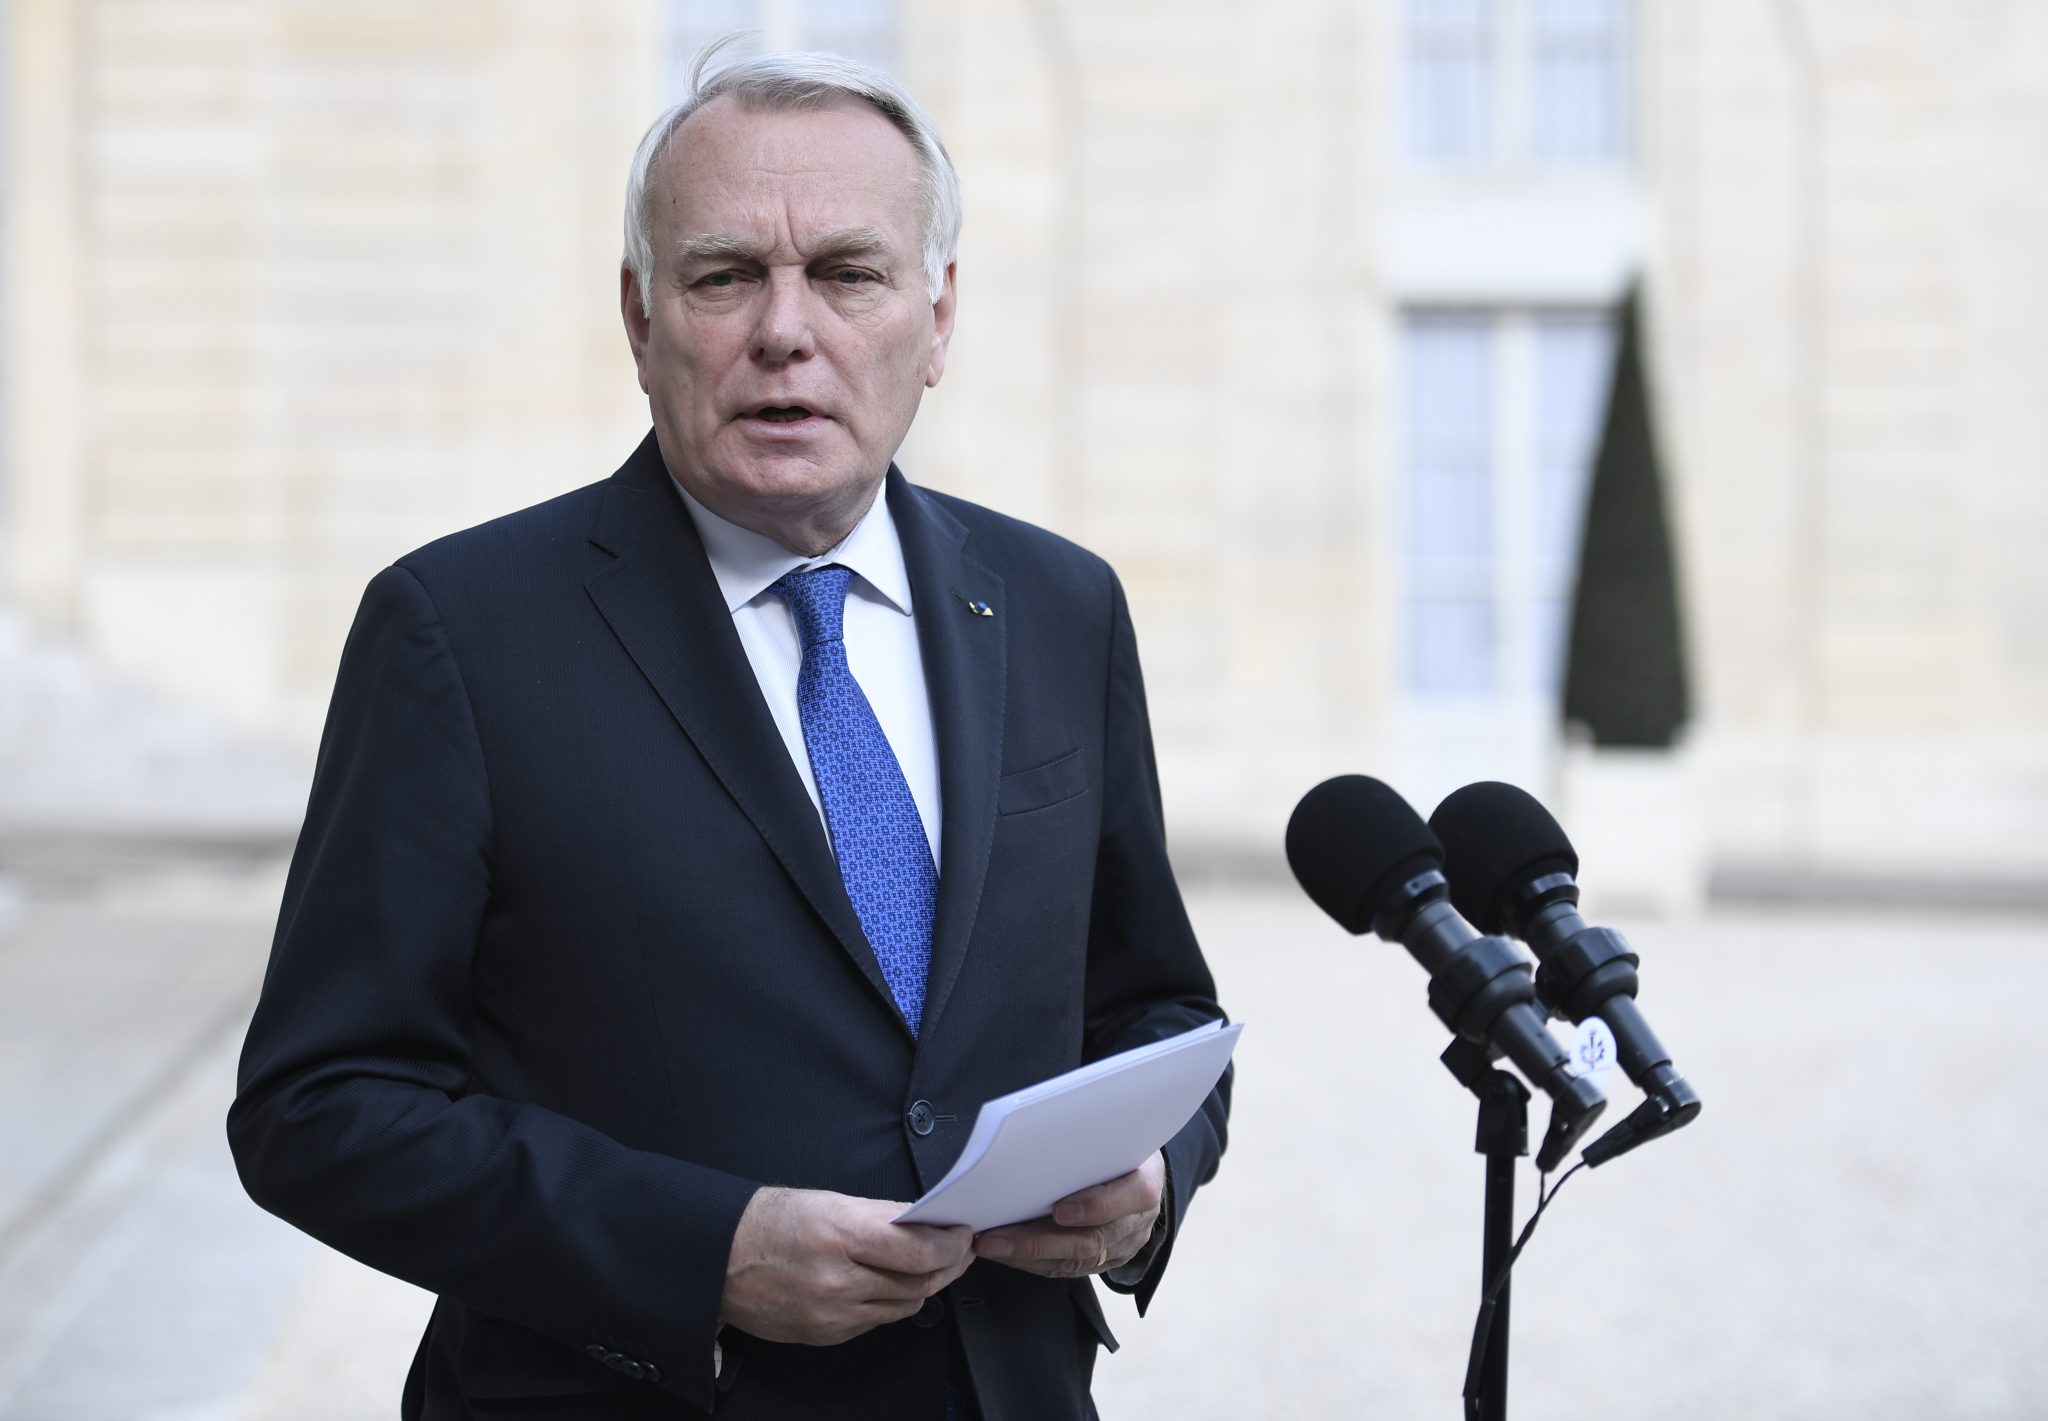 French Foreign Minister Jean-Marc Ayrault gives a statement to the media following a Defence Cabinet meeting on April 26, 2017 at the Elysee Palace in Paris. A report by French intelligence services blames the Syrian President's regime for a suspected chemical attack in rebel-held Syria that killed 87 people, Foreign Minister Jean-Marc Ayrault said Wednesday. / AFP PHOTO / STEPHANE DE SAKUTIN